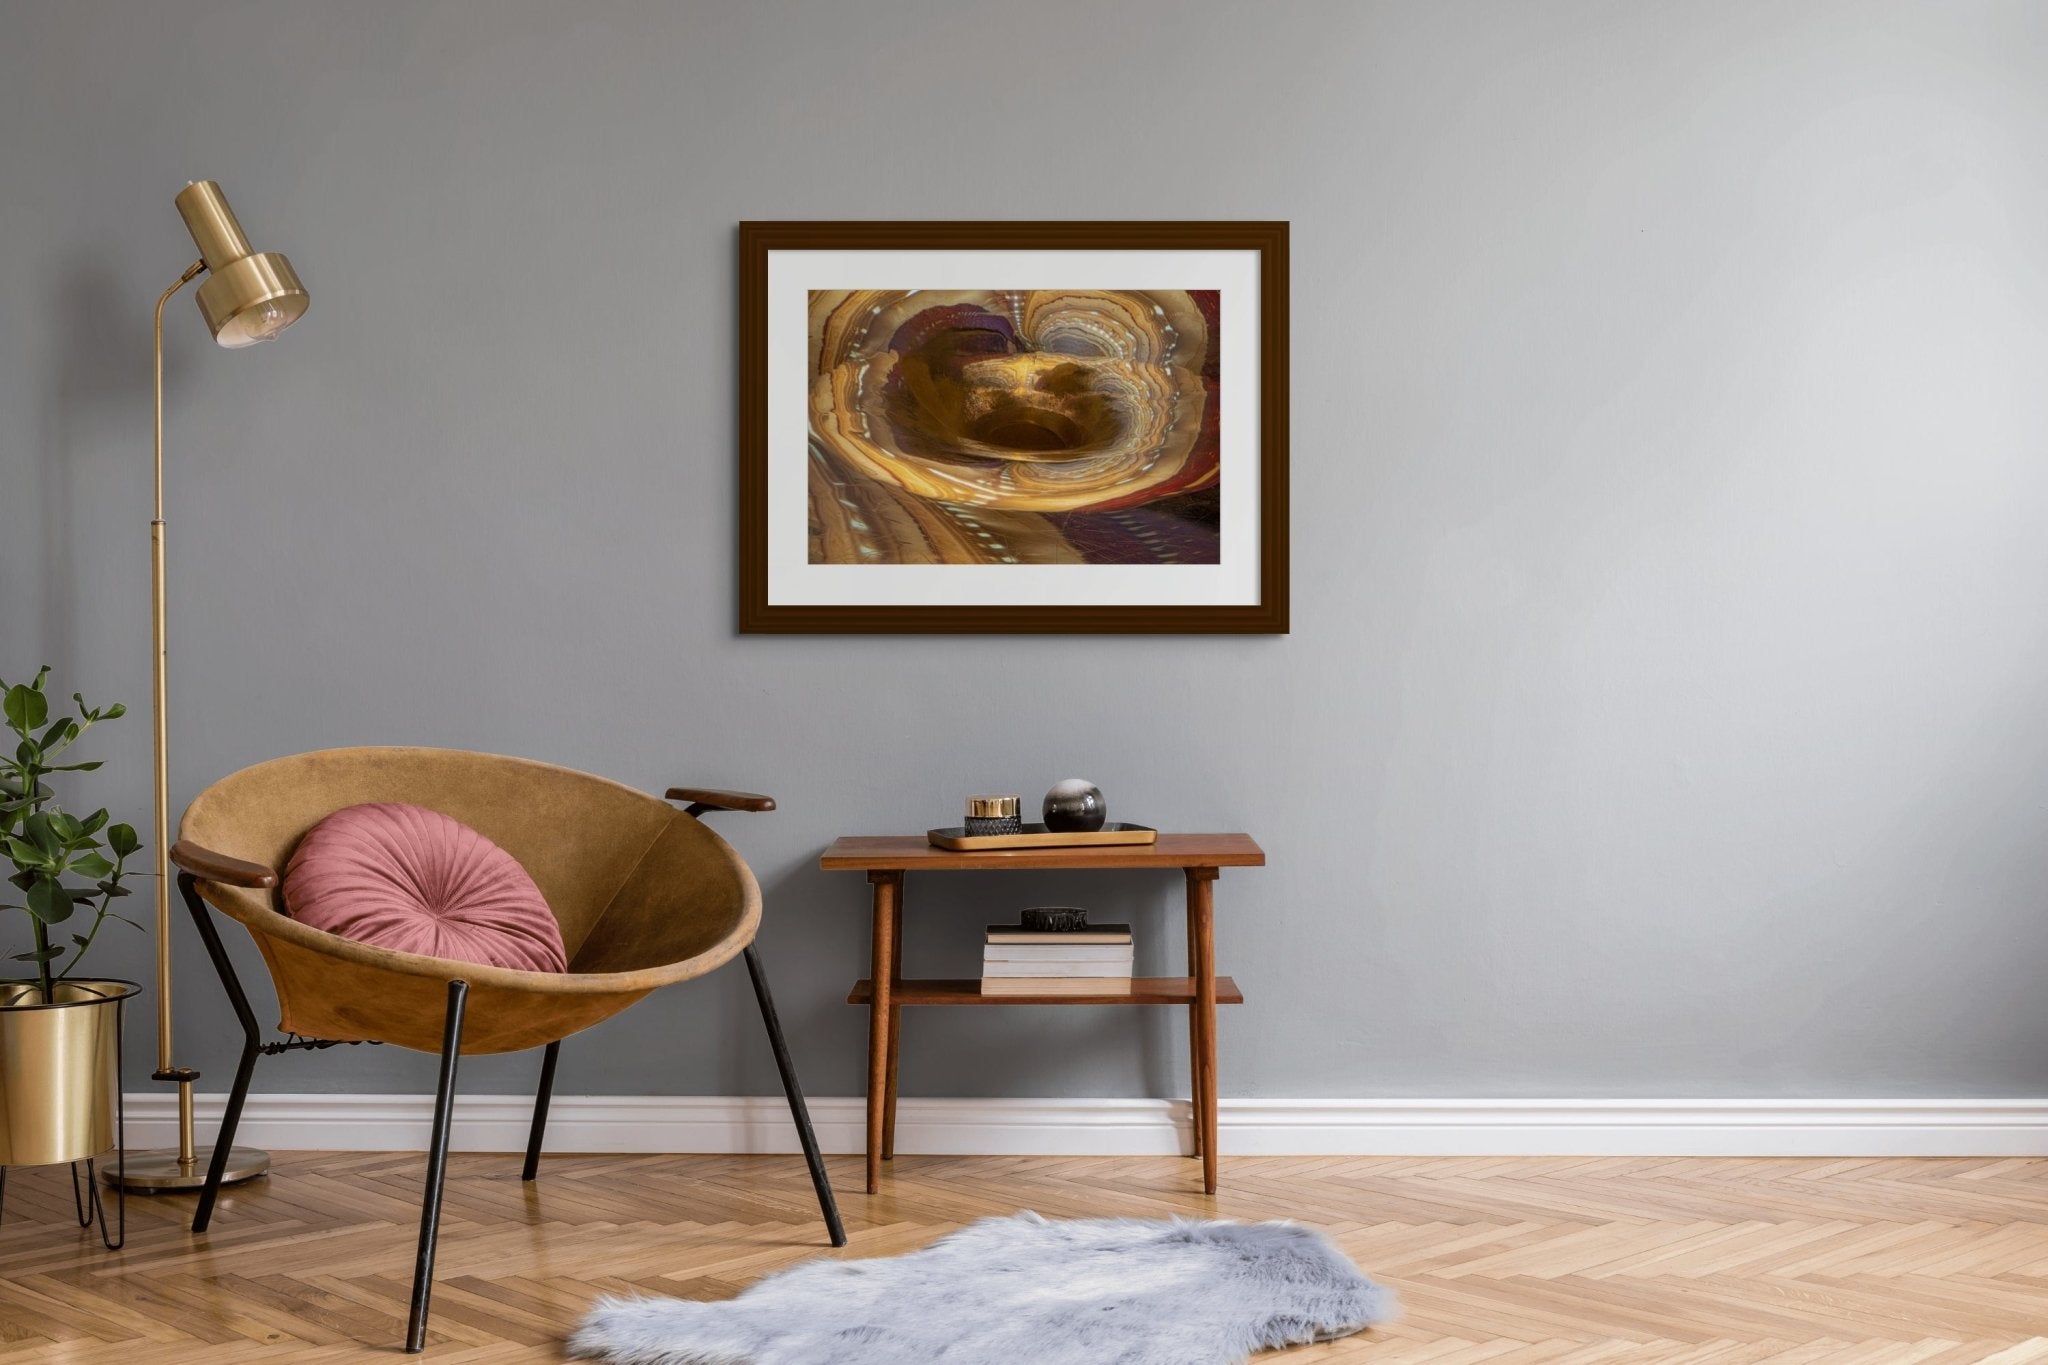 Photo of Yamaha 867d French Horn, Part 1. Signed Limited Edition Museum Quality Print. - Giclée Museum Quality Print - Architecture In Music